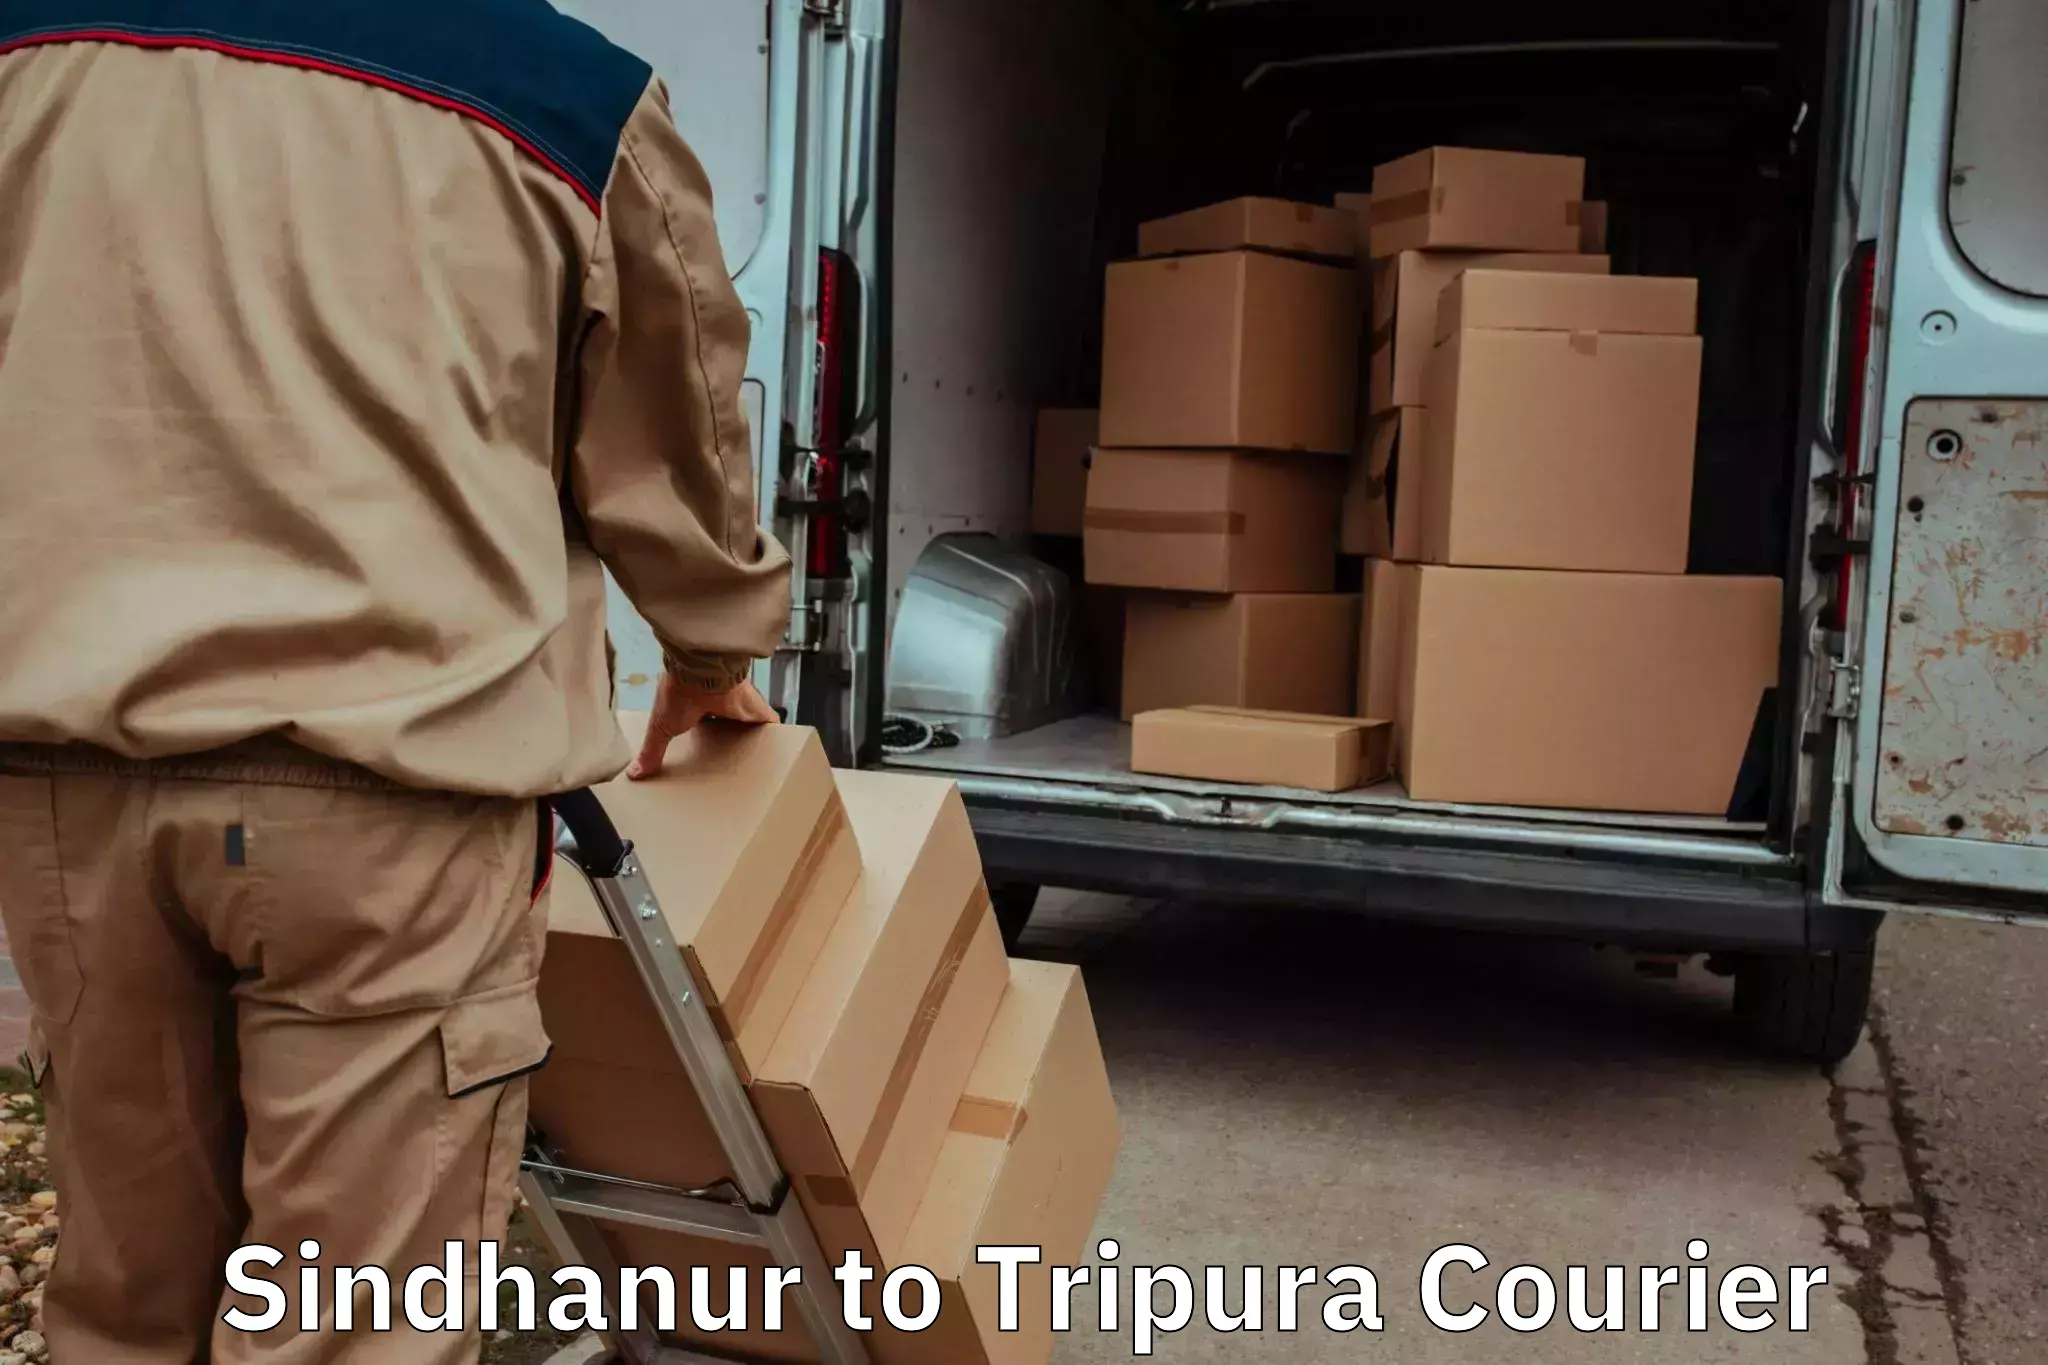 Moving and storage services Sindhanur to Udaipur Tripura